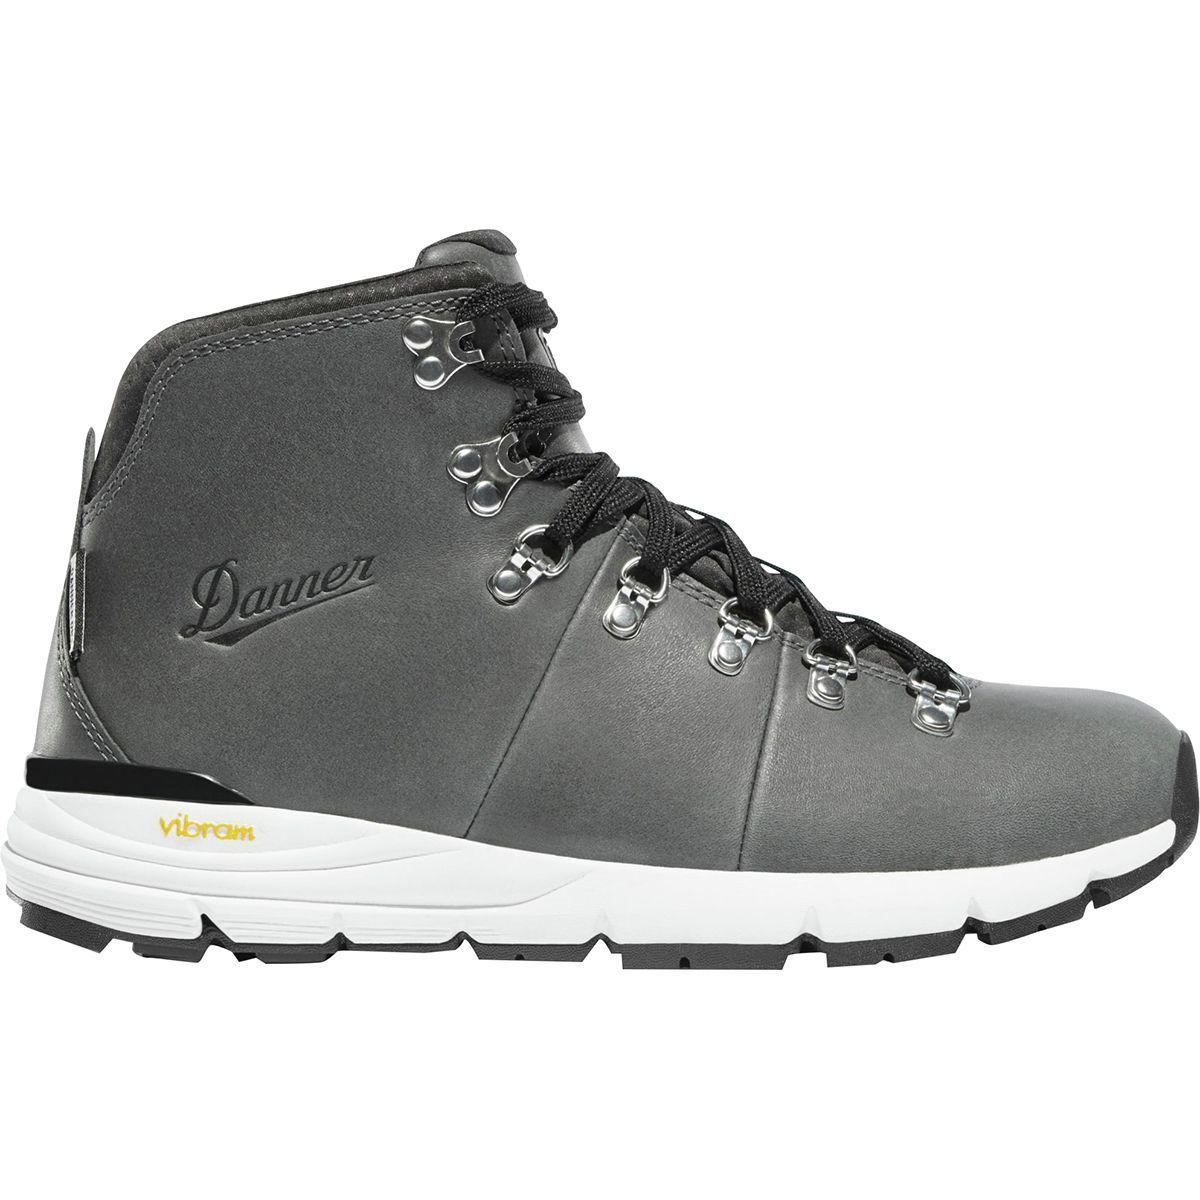 Danner Suede Mountain 600 Hiking Boot in Gray - Lyst